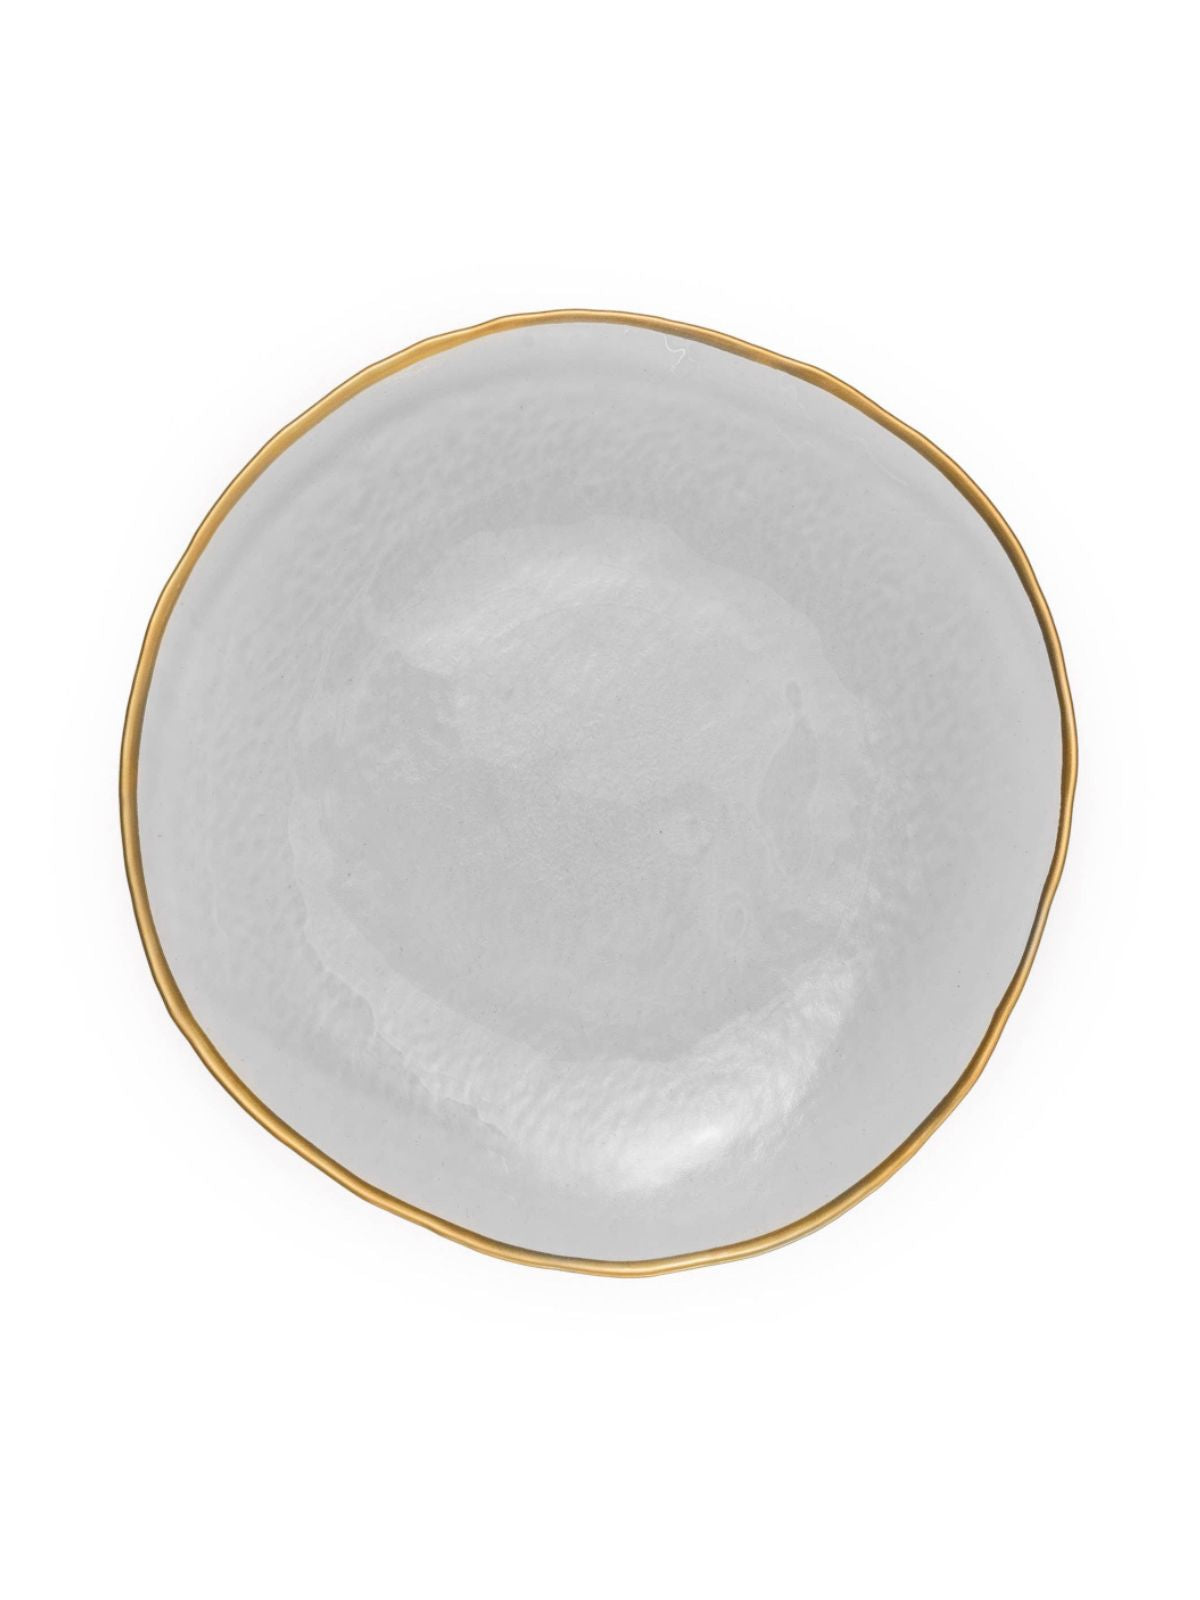 This set of 4 salad plate were designed out of fine glass material and decorated with a bold gold trim. Its beautiful shape, size, and design makes it ideal for every occasion.